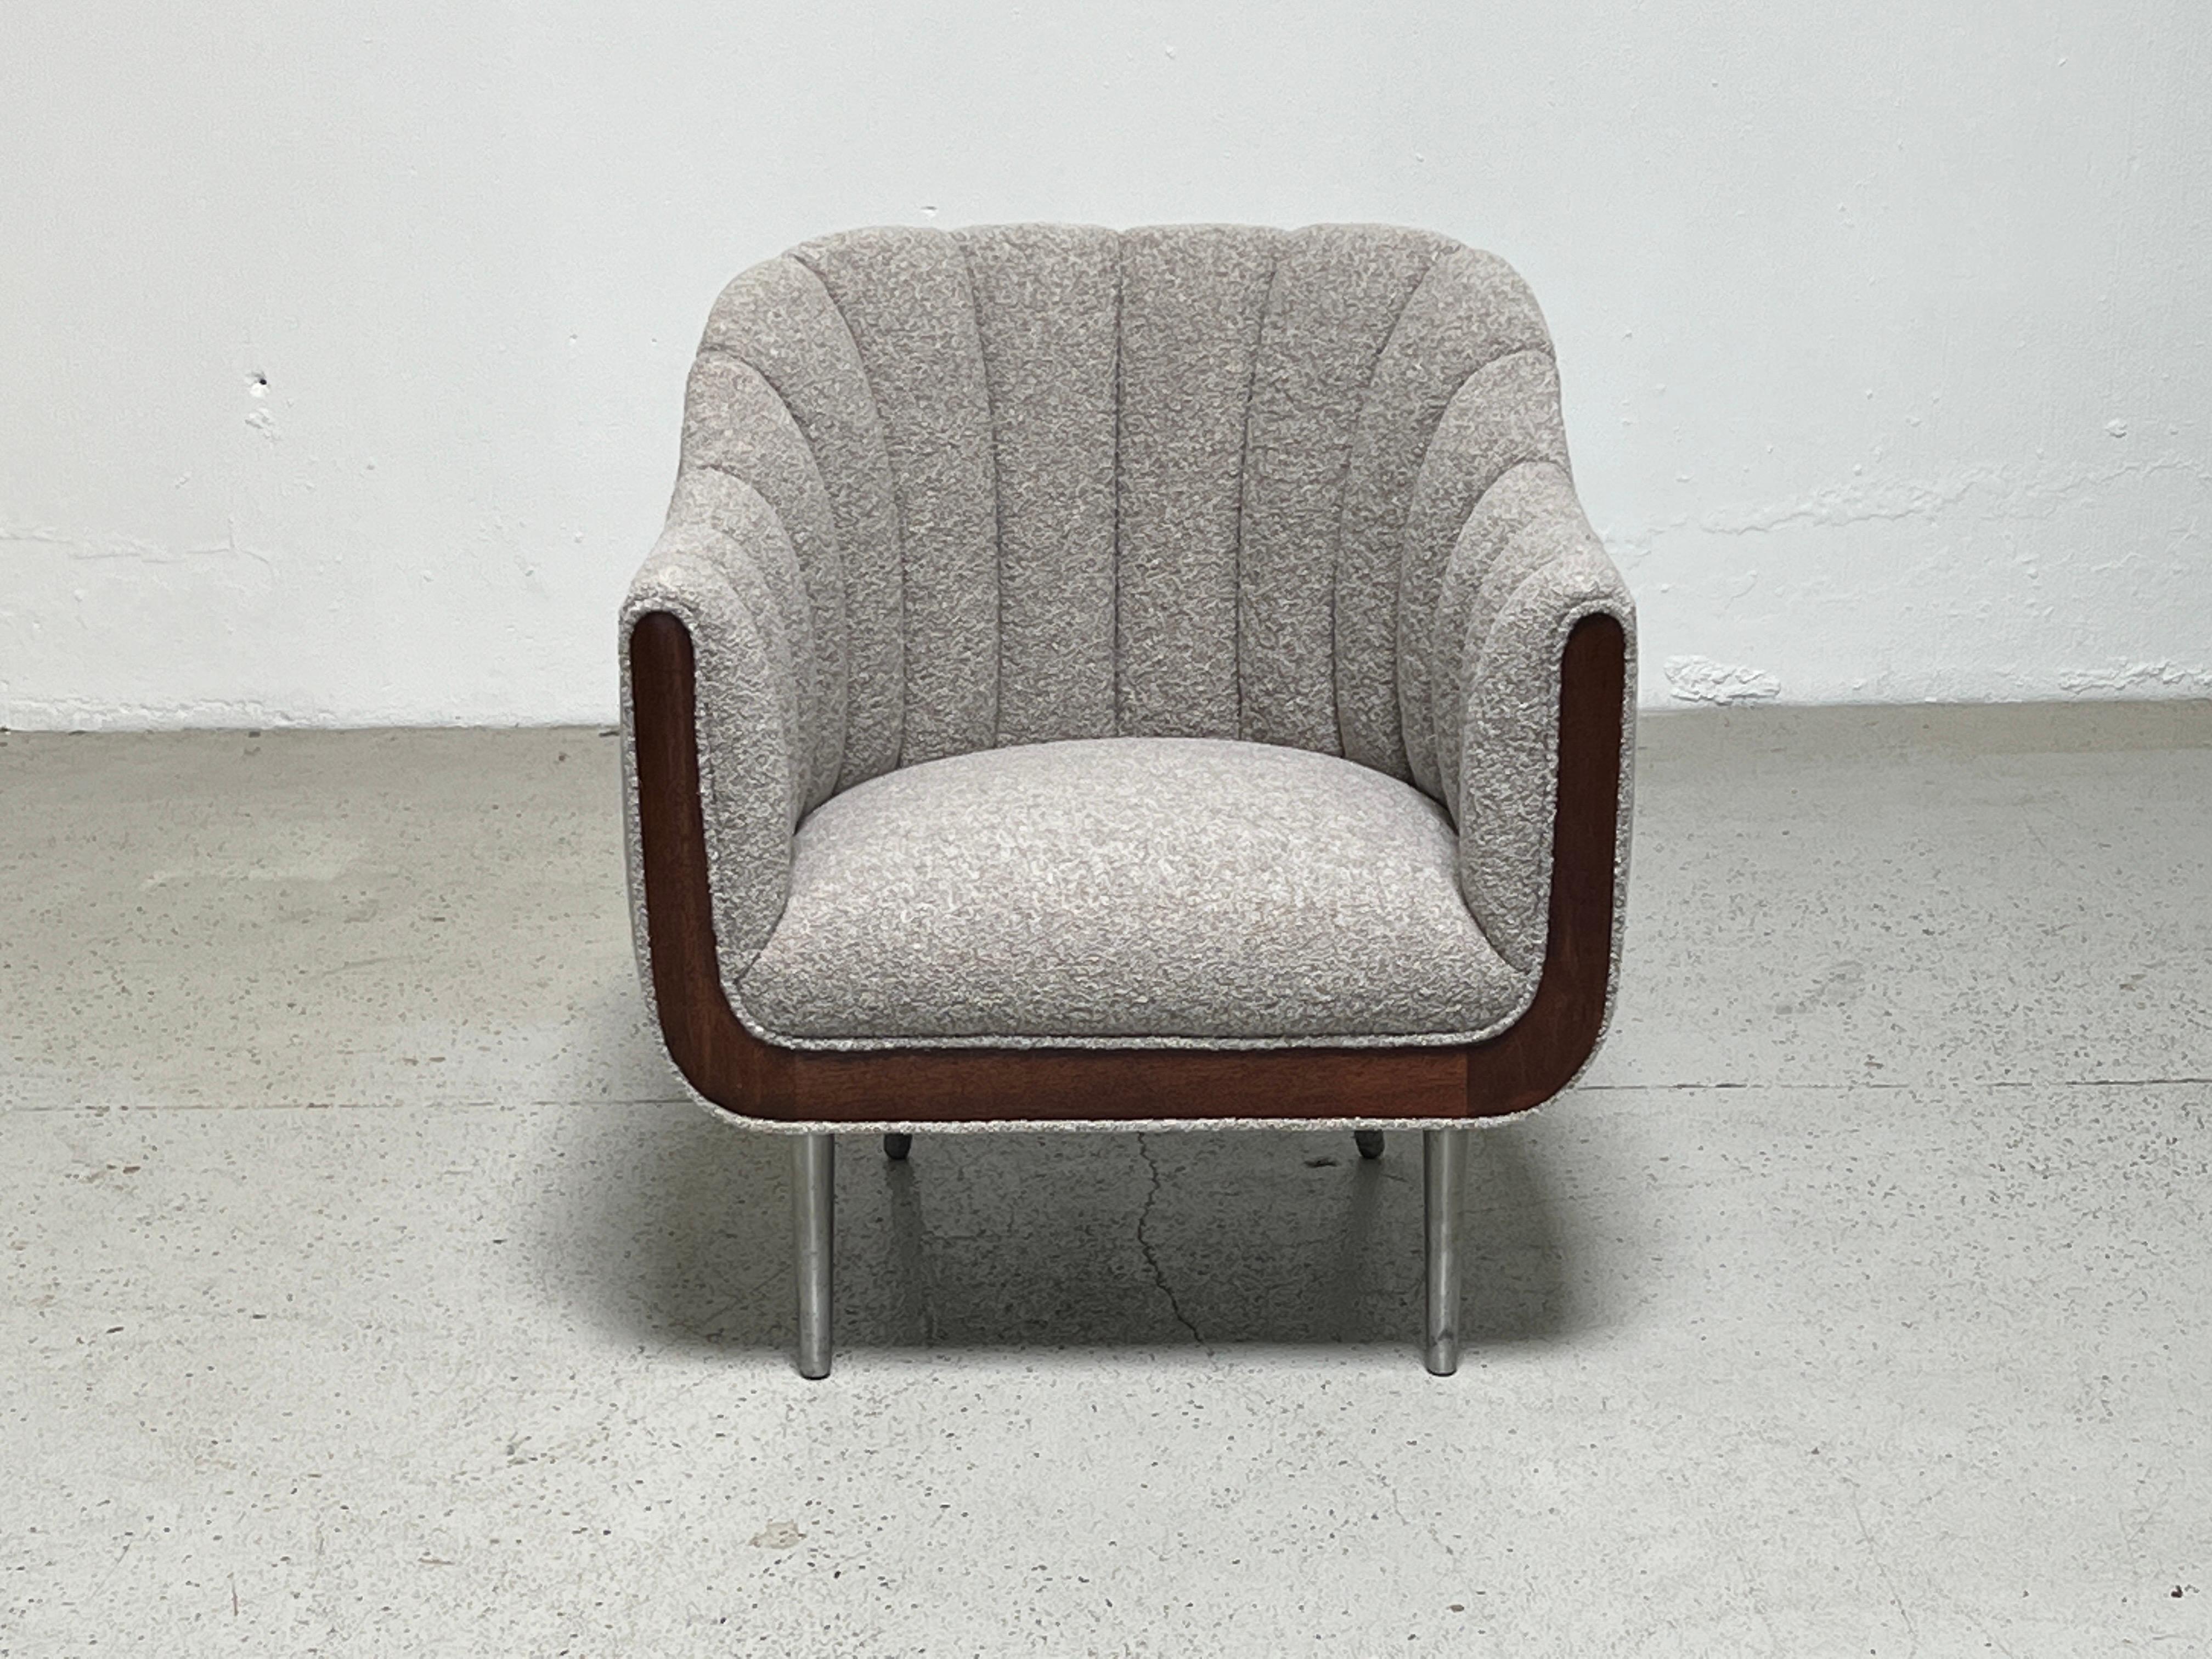 An unusual and early design by Edward Wormley for Dunbar. This channel back lounge chair has mahogany trim and aluminum legs. Fully restored and reupholstered in Designtex / Lambert / Smoke.